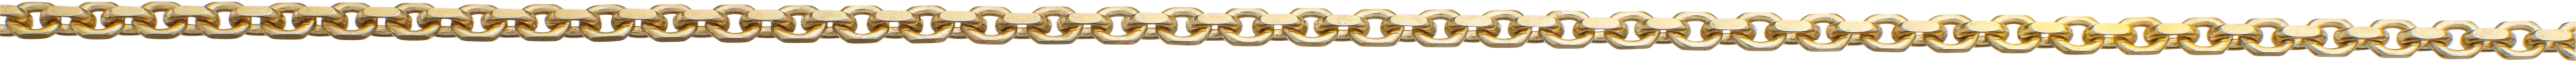 Anchor chain diamond plated gold 333/- 1.60mm, wire thickness 0.50mm